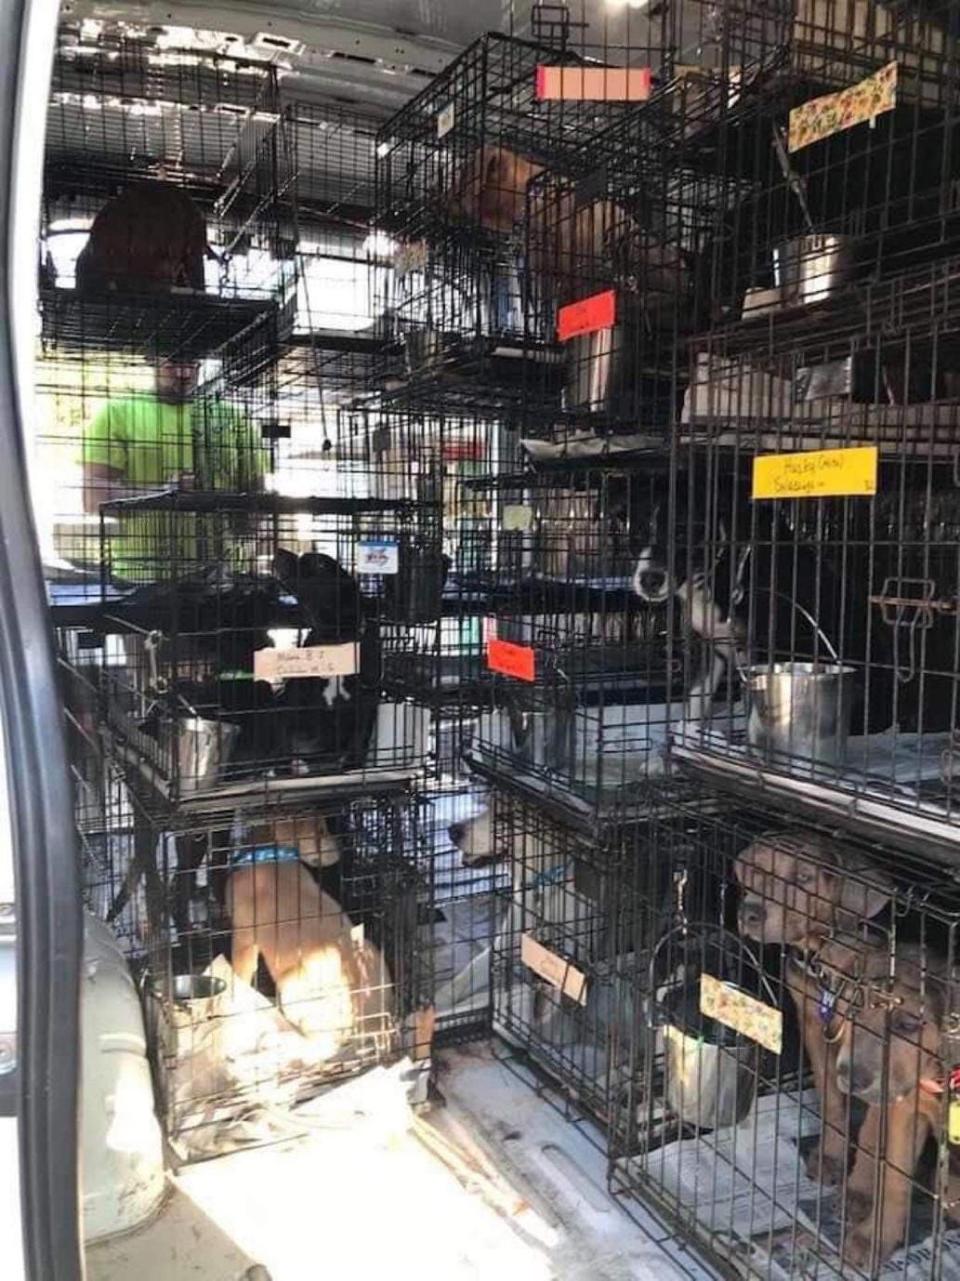 The Humane Society Pet Rescue & Adoption Center has been transporting homeless pets out of state, to areas where people are looking for pets to adopt.